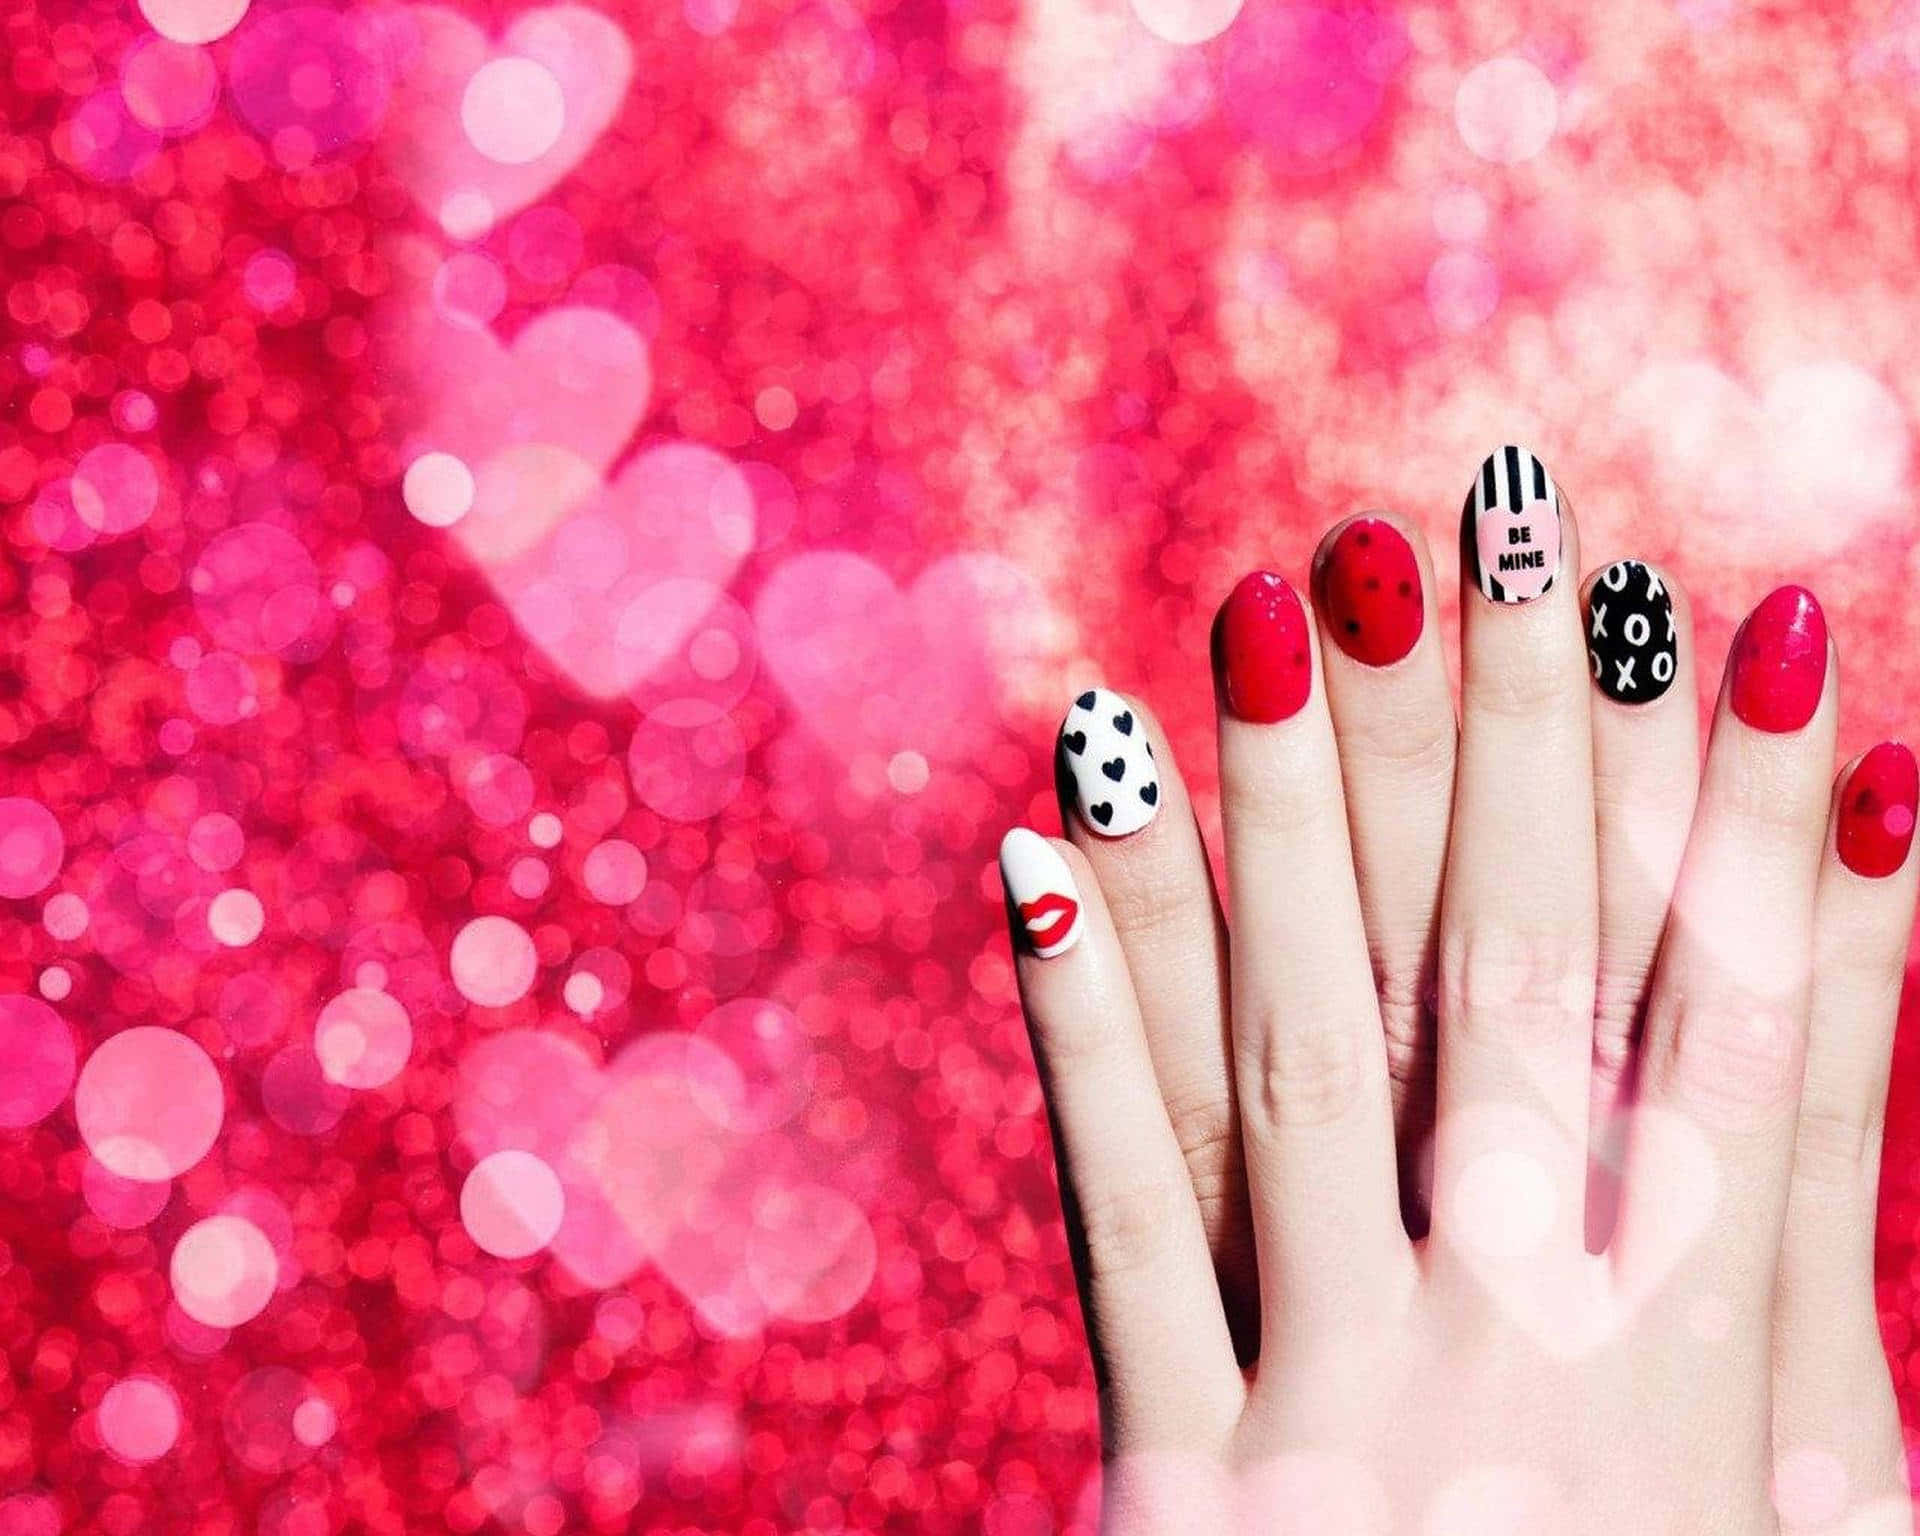 Create your own beautiful manicures.